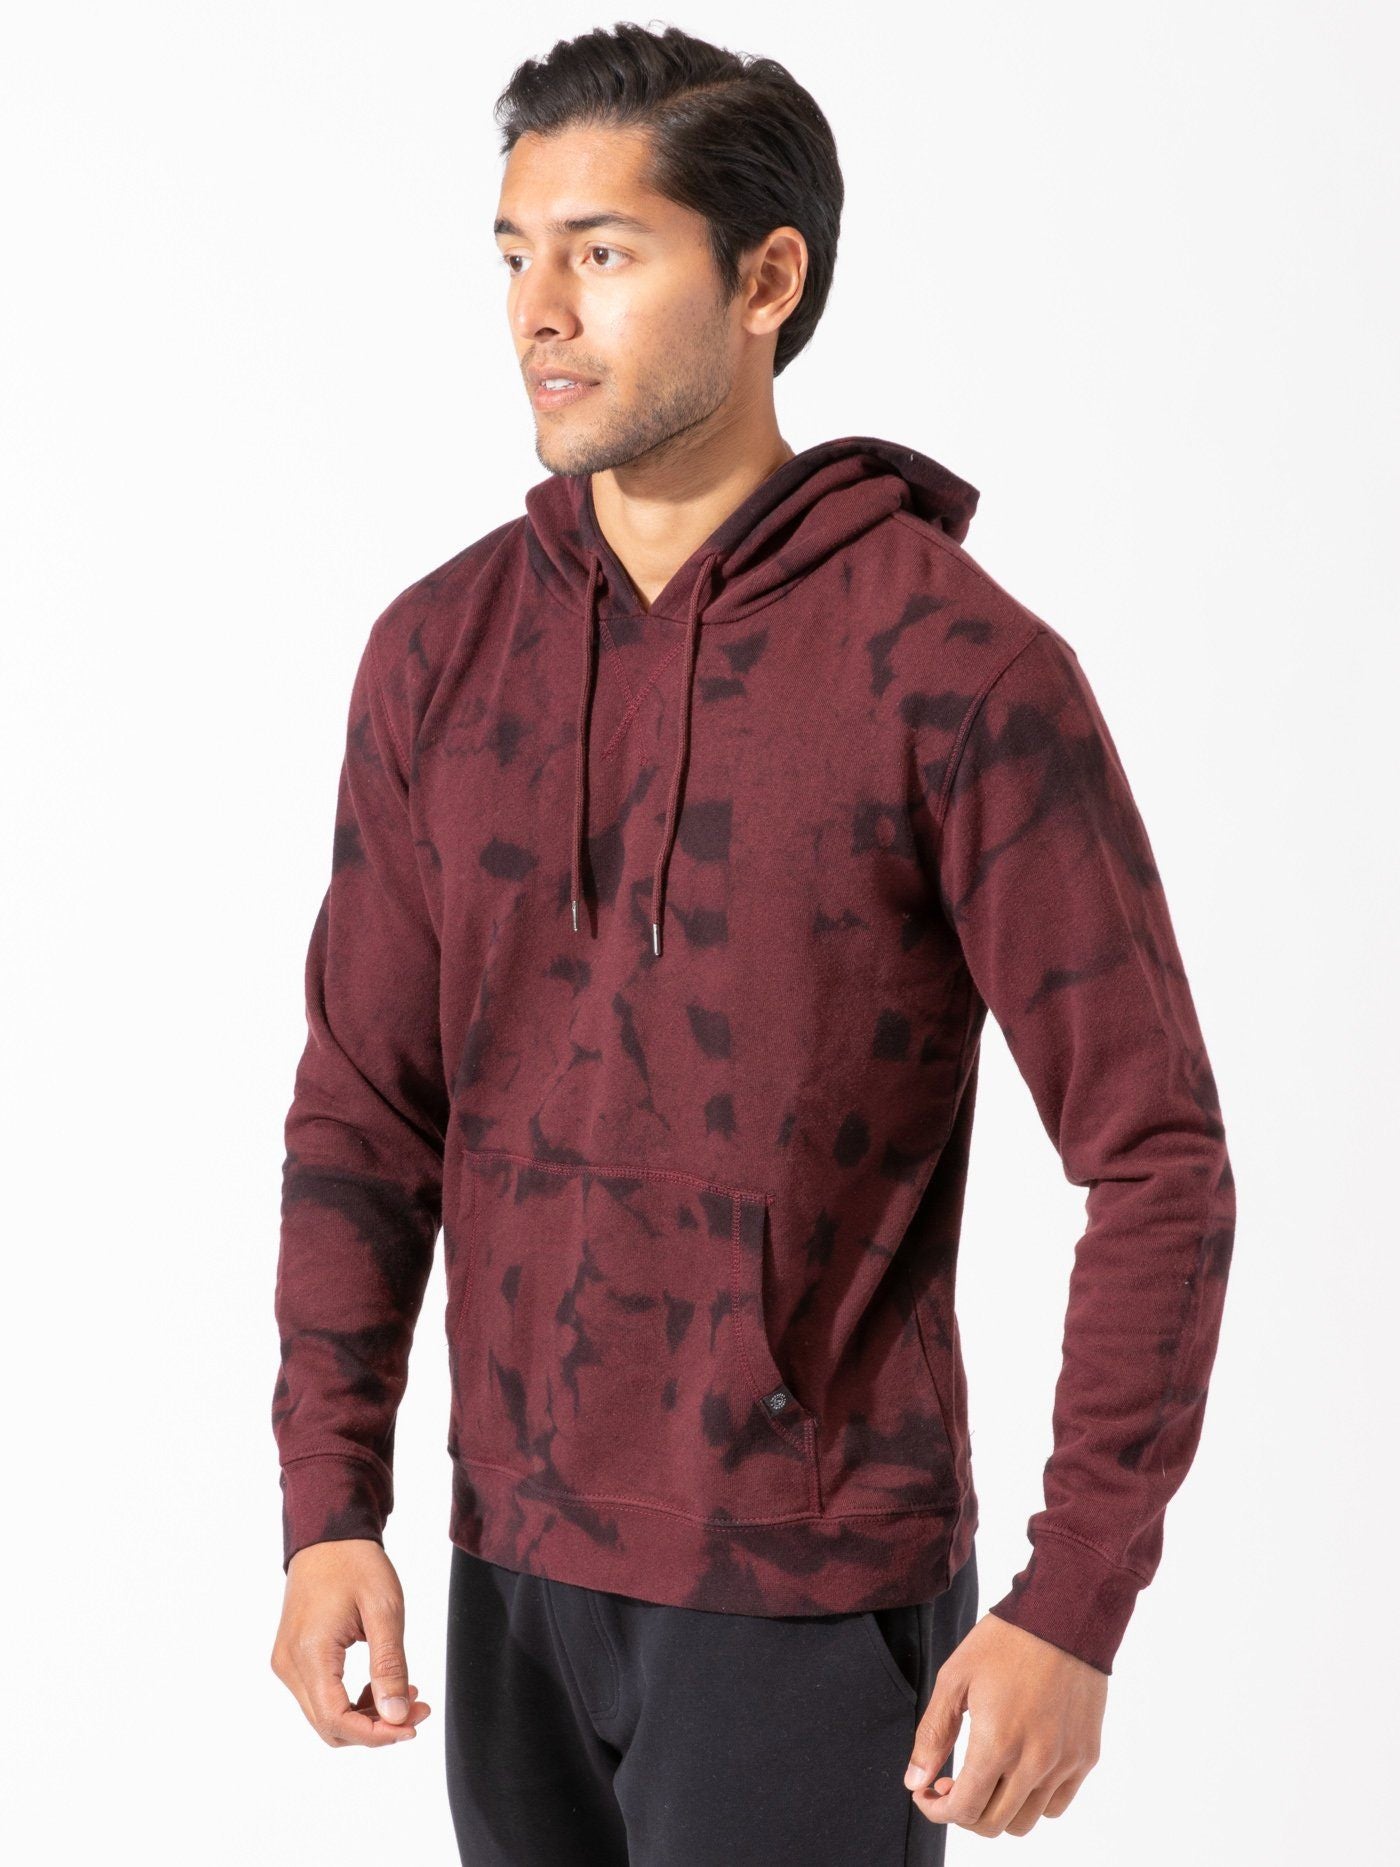 Dark Cloud Wash Hoodie Mens Tops Threads 4 Thought 